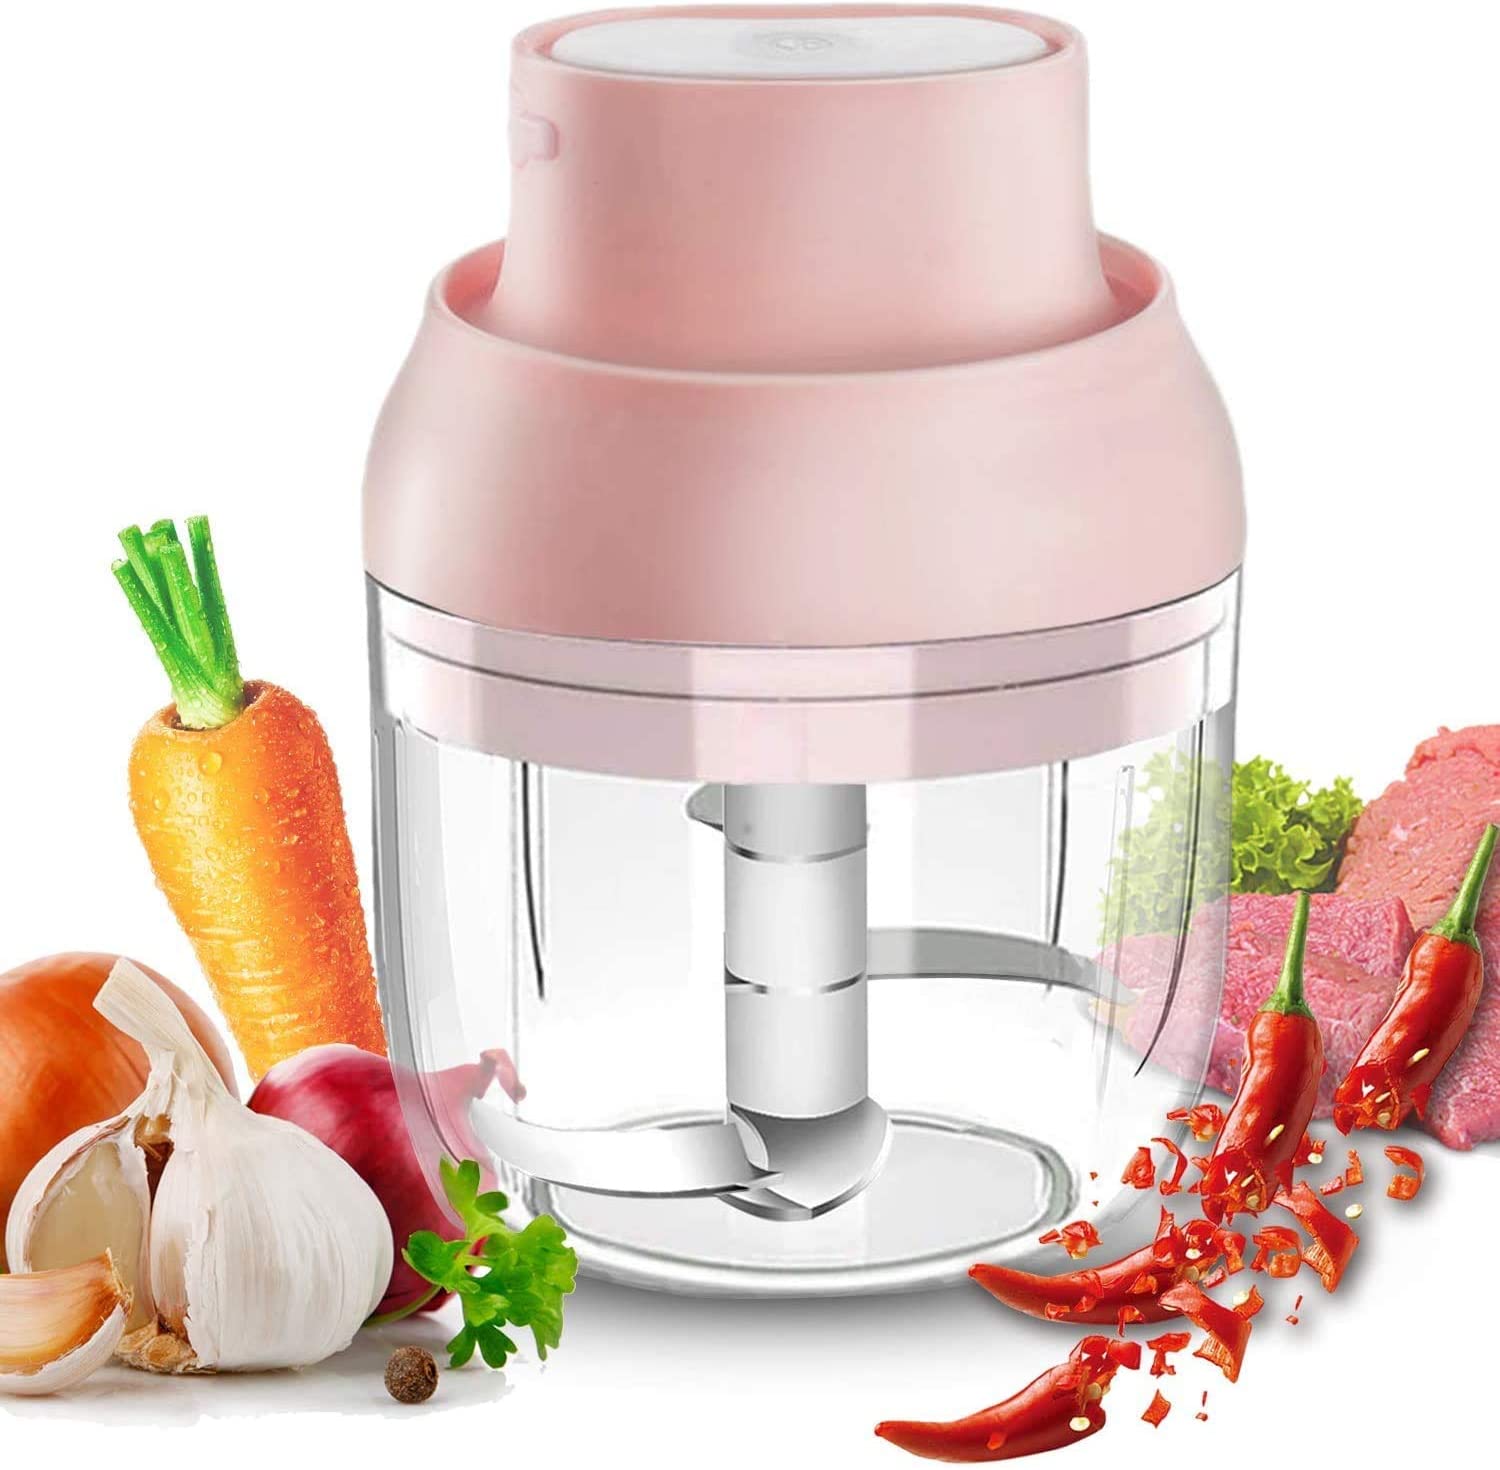 iWhale Mini Electric Kitchen Chopper, 250 ml Electric Portable Food Processor USB Charging Vegetable Mixer with 3 Sharp Blades, Small Mini Grinder for Baby Food, Meat, Onions, Garlic